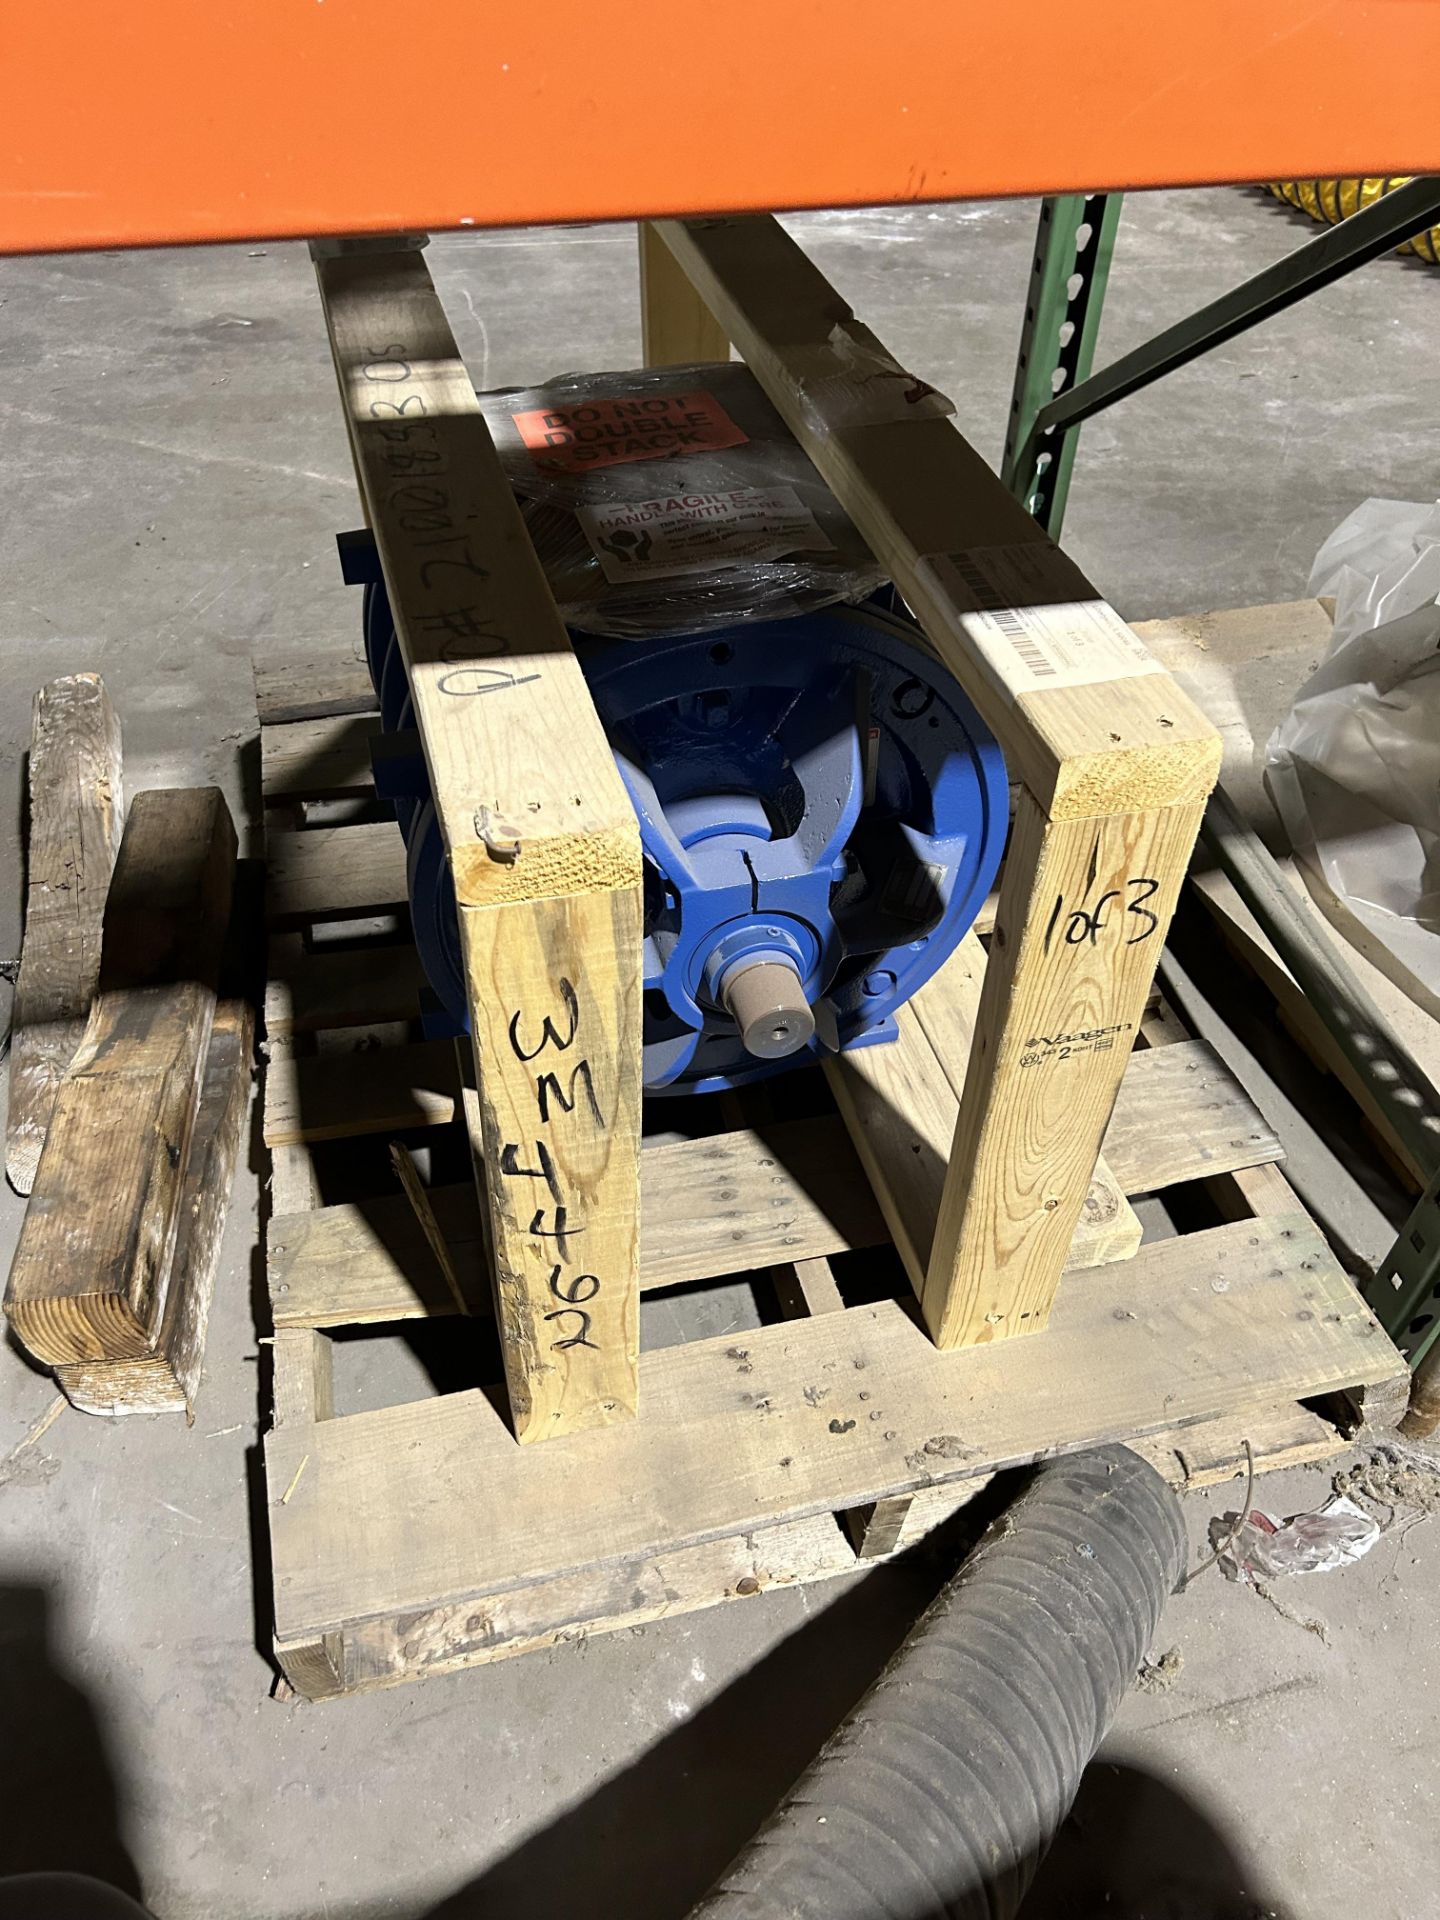 Andritz Rotary Valve , Rigging & Loading Fee: $125 - Image 9 of 9